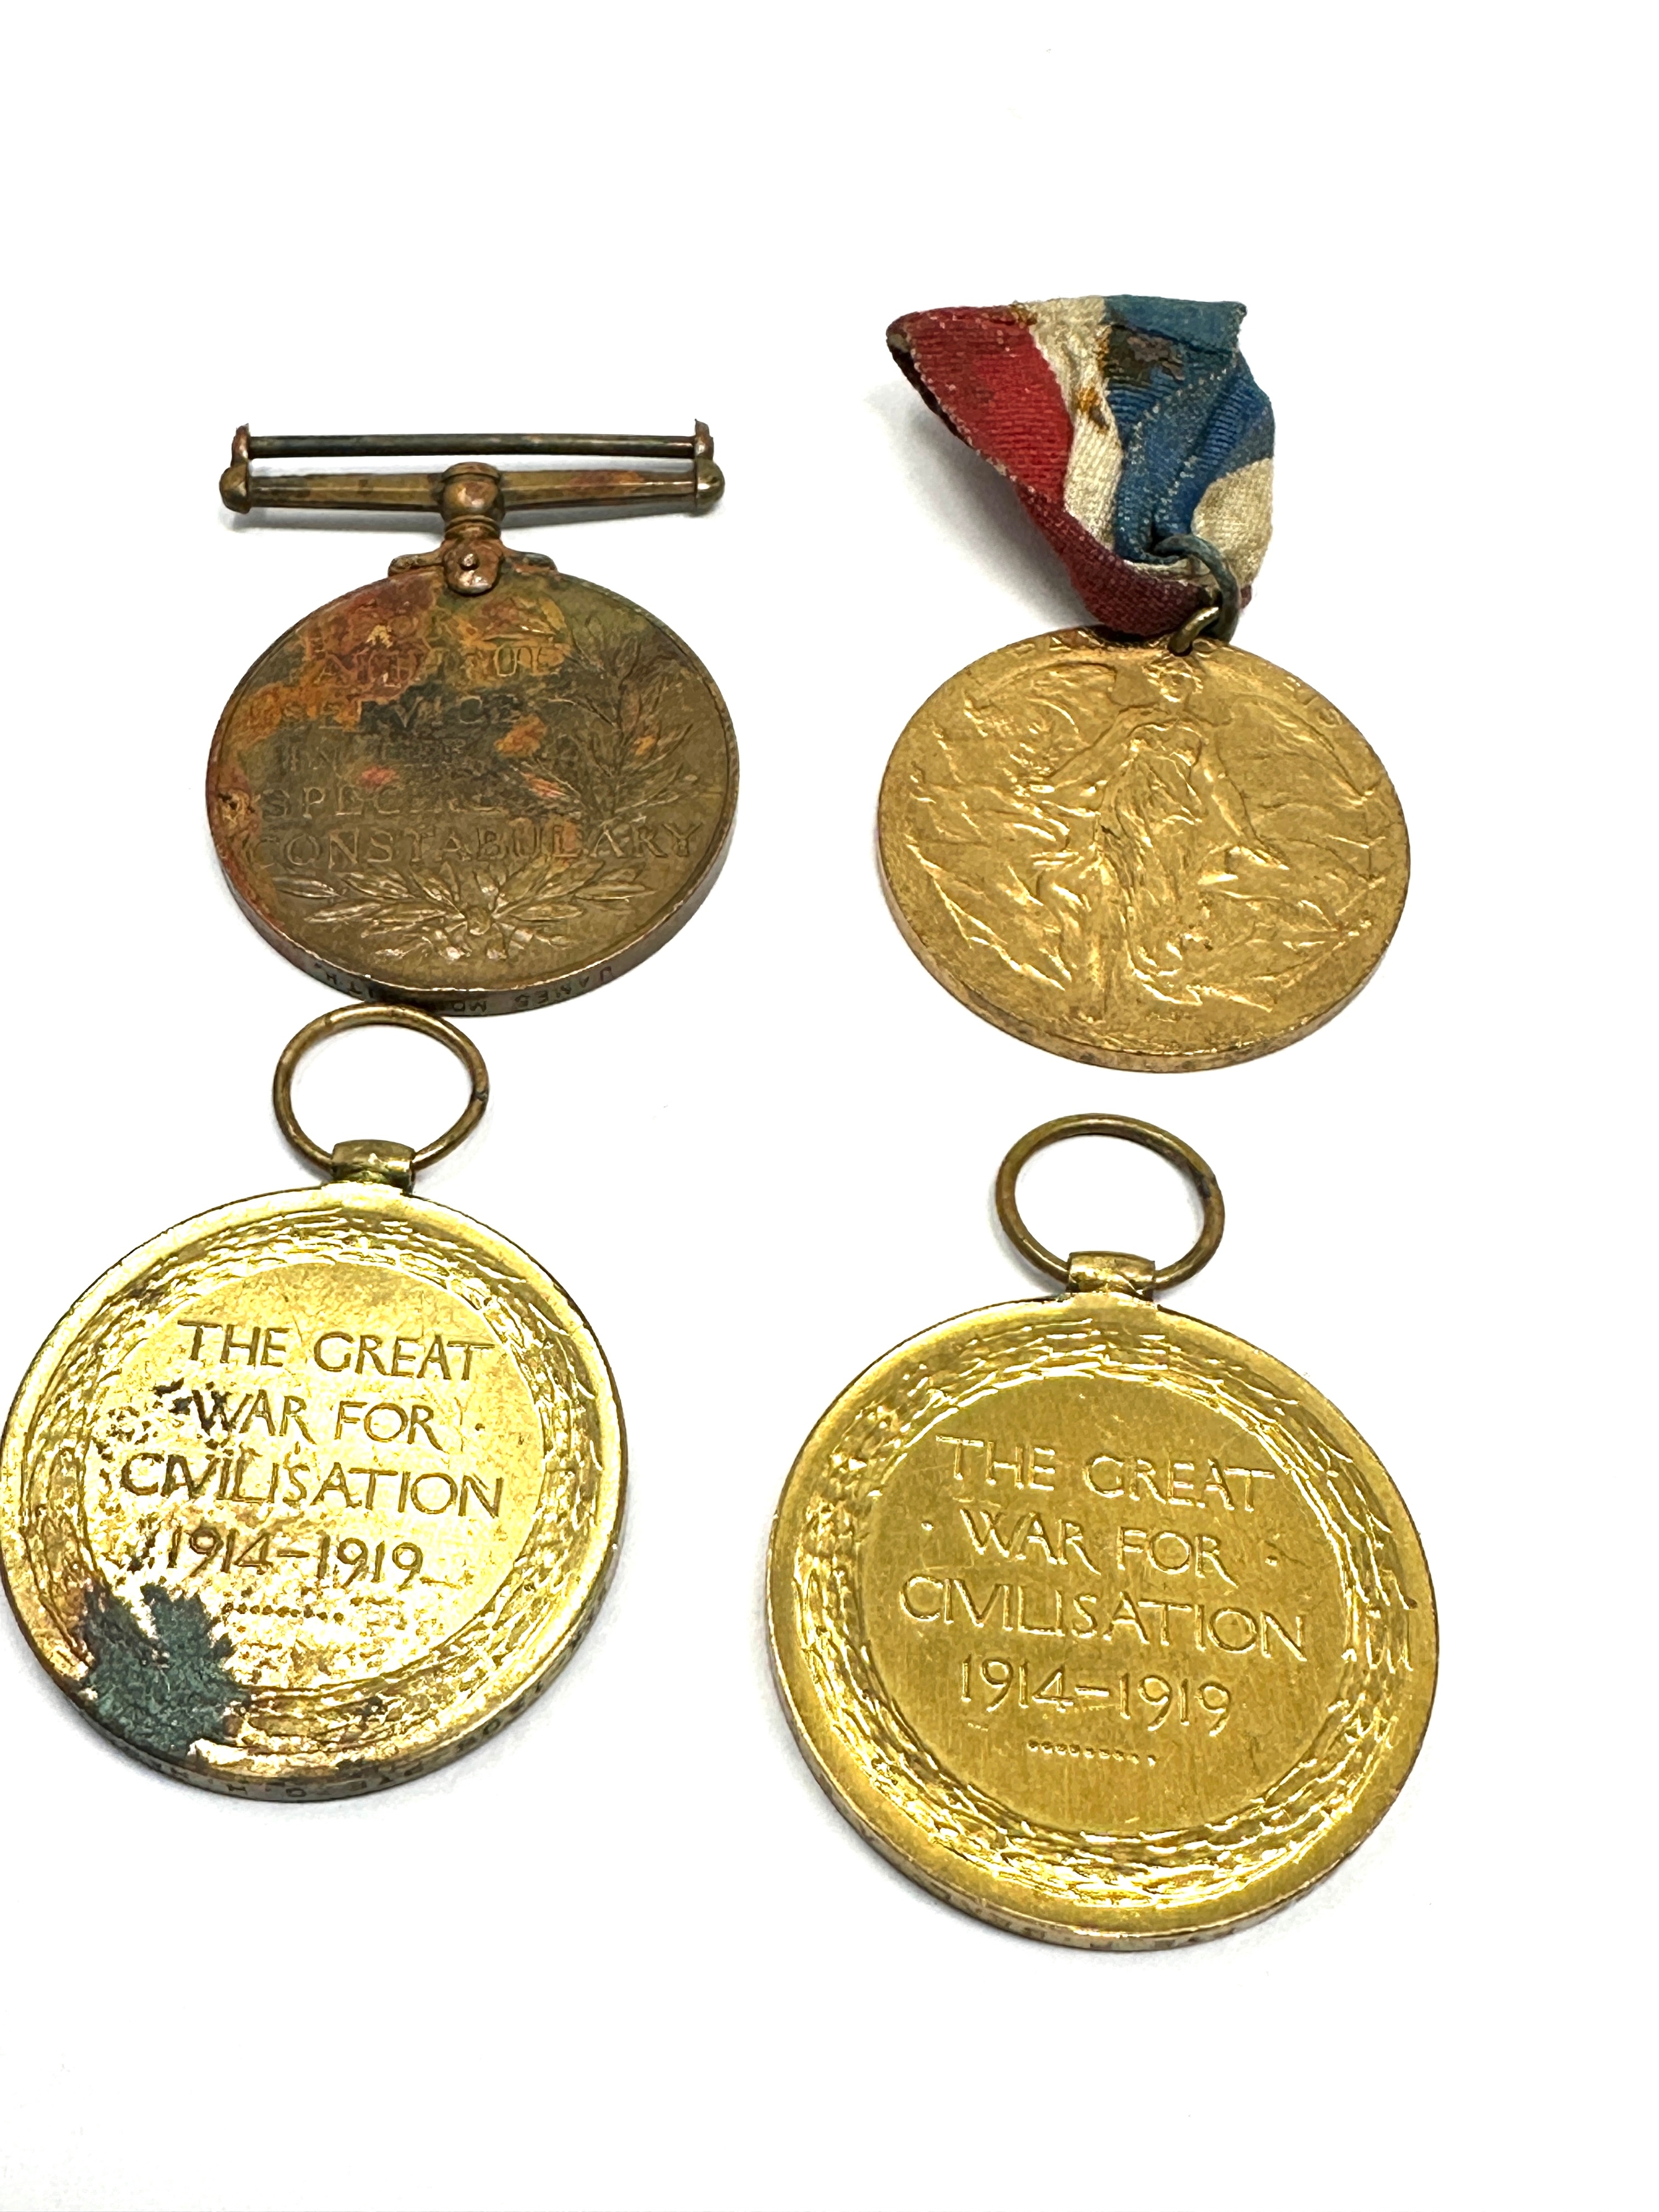 w ww1 -gv medals victory medal named s4-094957pte p.beal a.a.c & stk -1308.pte c.h.hardy r.fus - Image 2 of 2